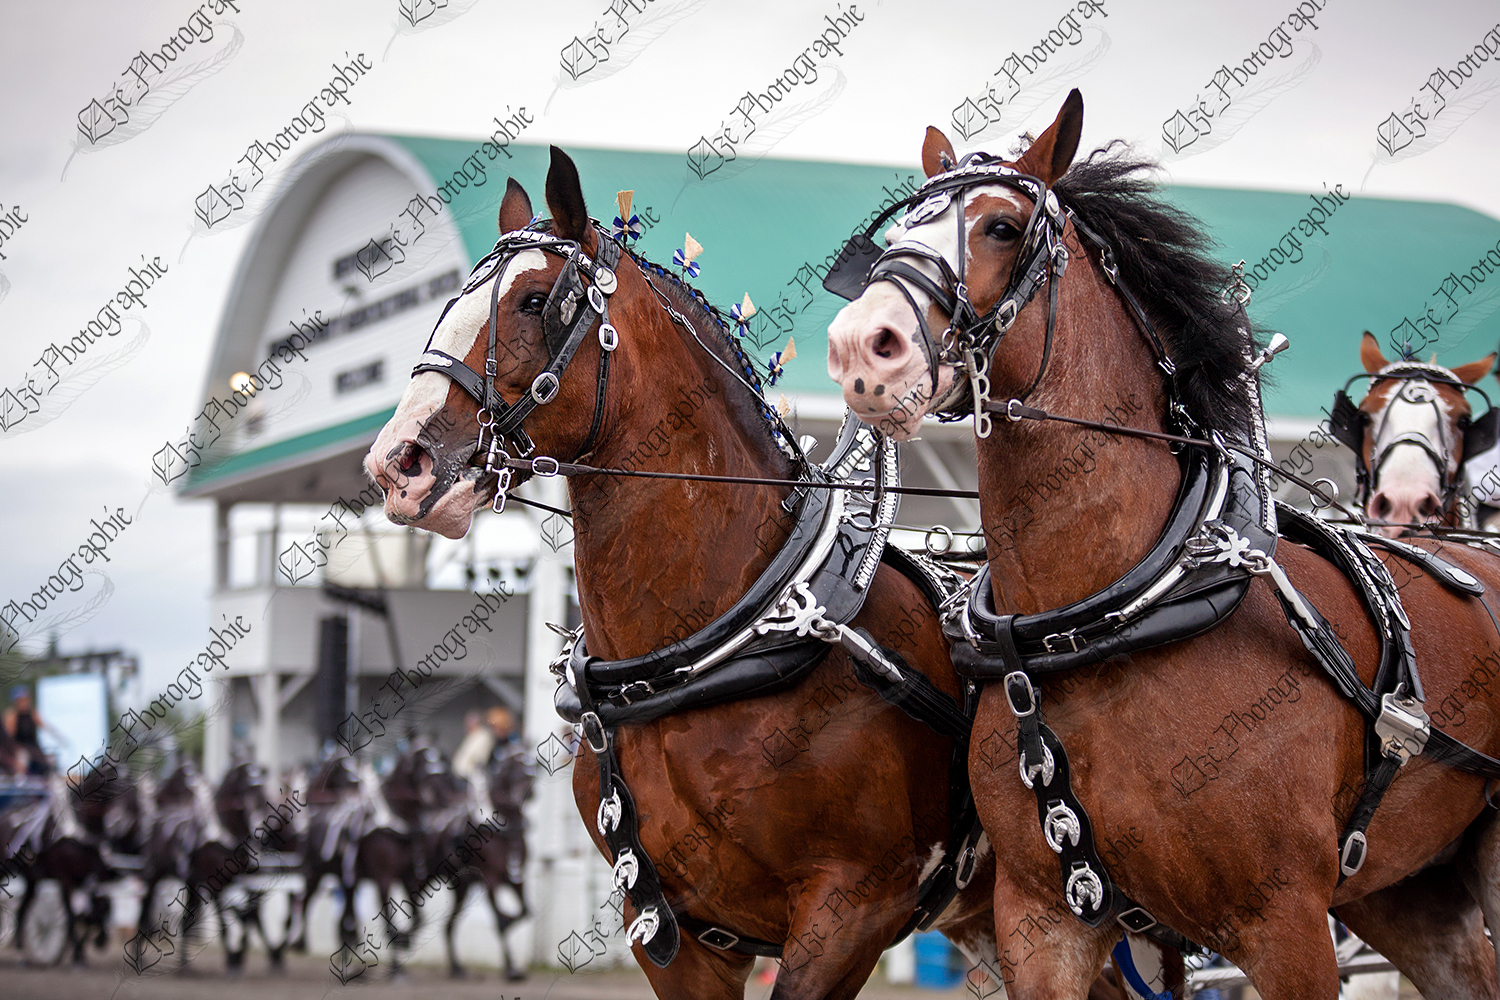 elze_photo_6818_clydesdale_spectacle_attelage_horse_show_exposition